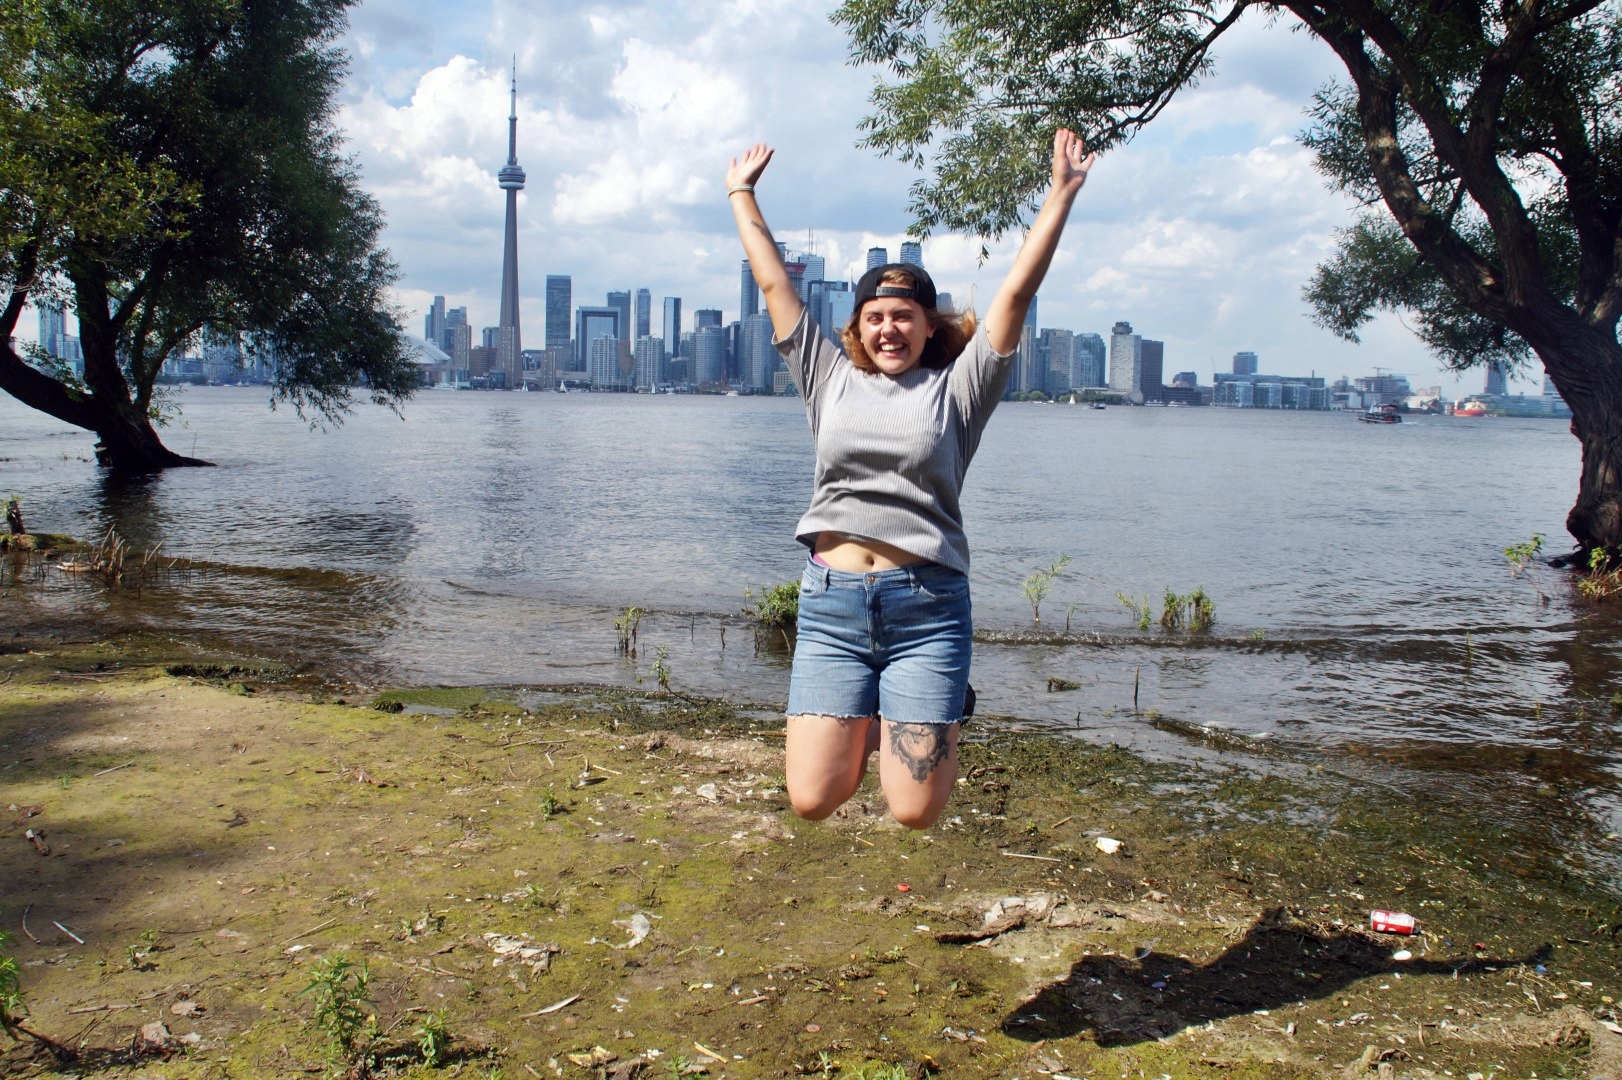 Jumping for joy in Toronto!